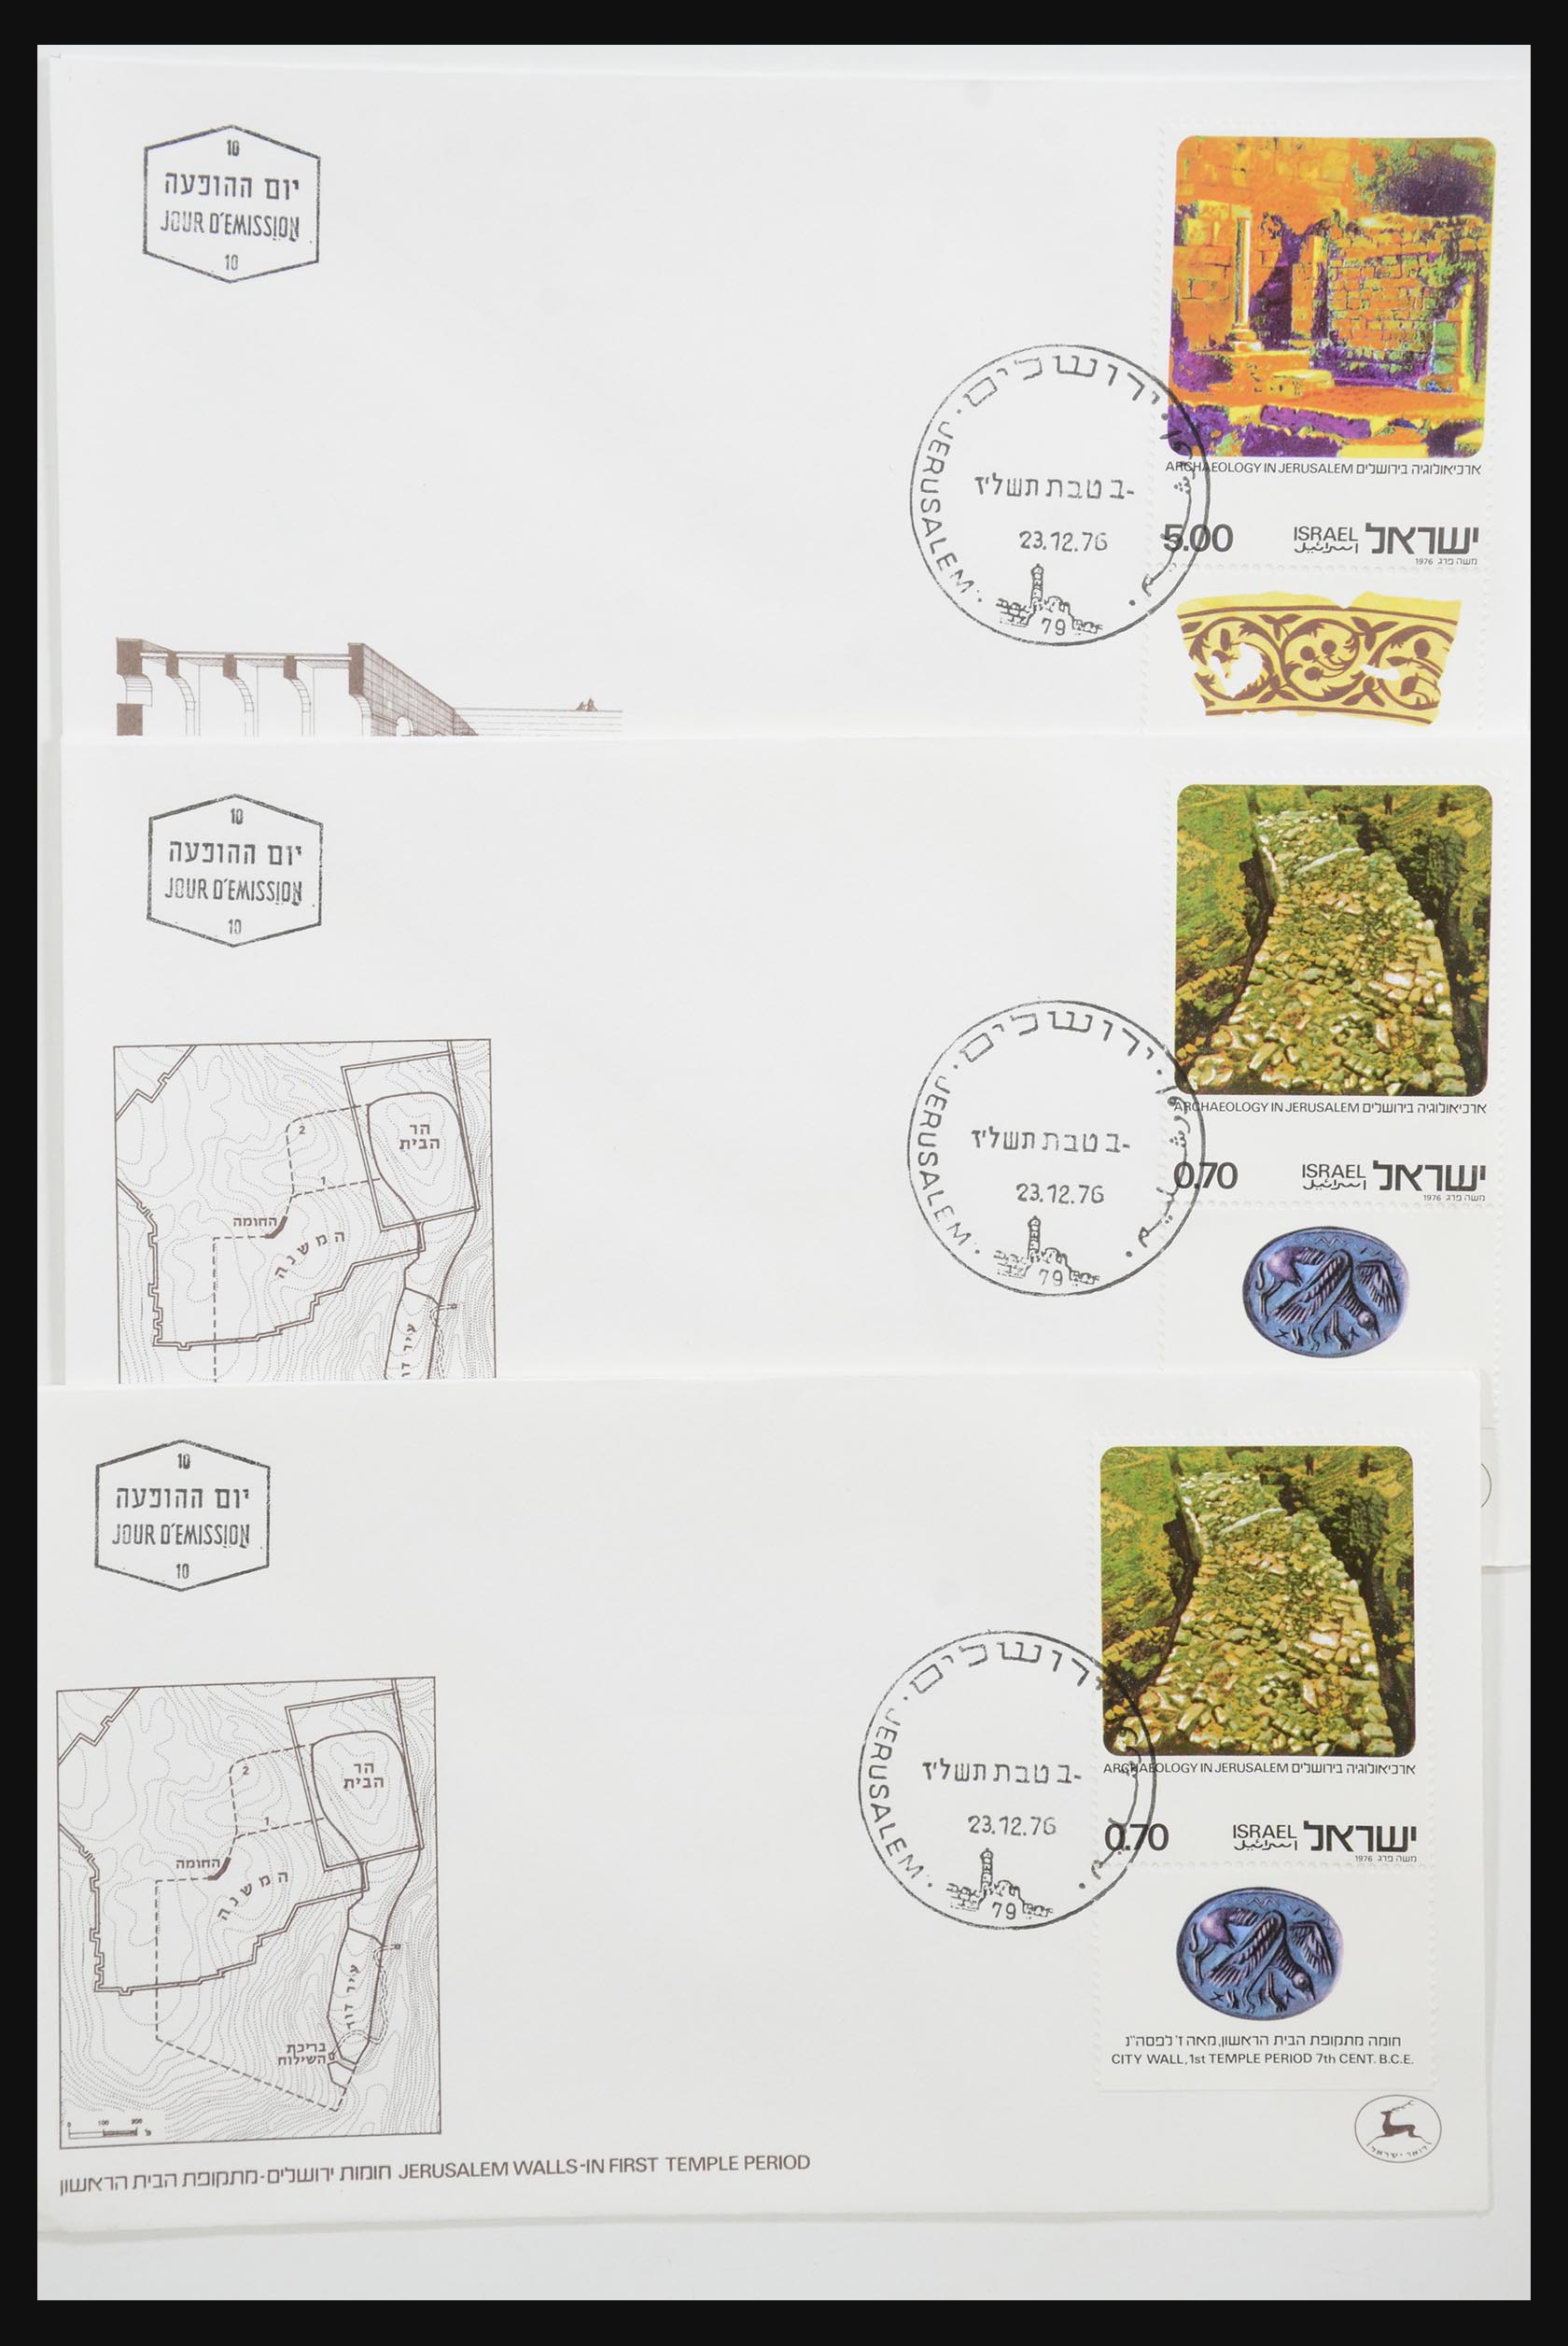 31924 001 - 31924 Israel first day cover collection 1957-2003.